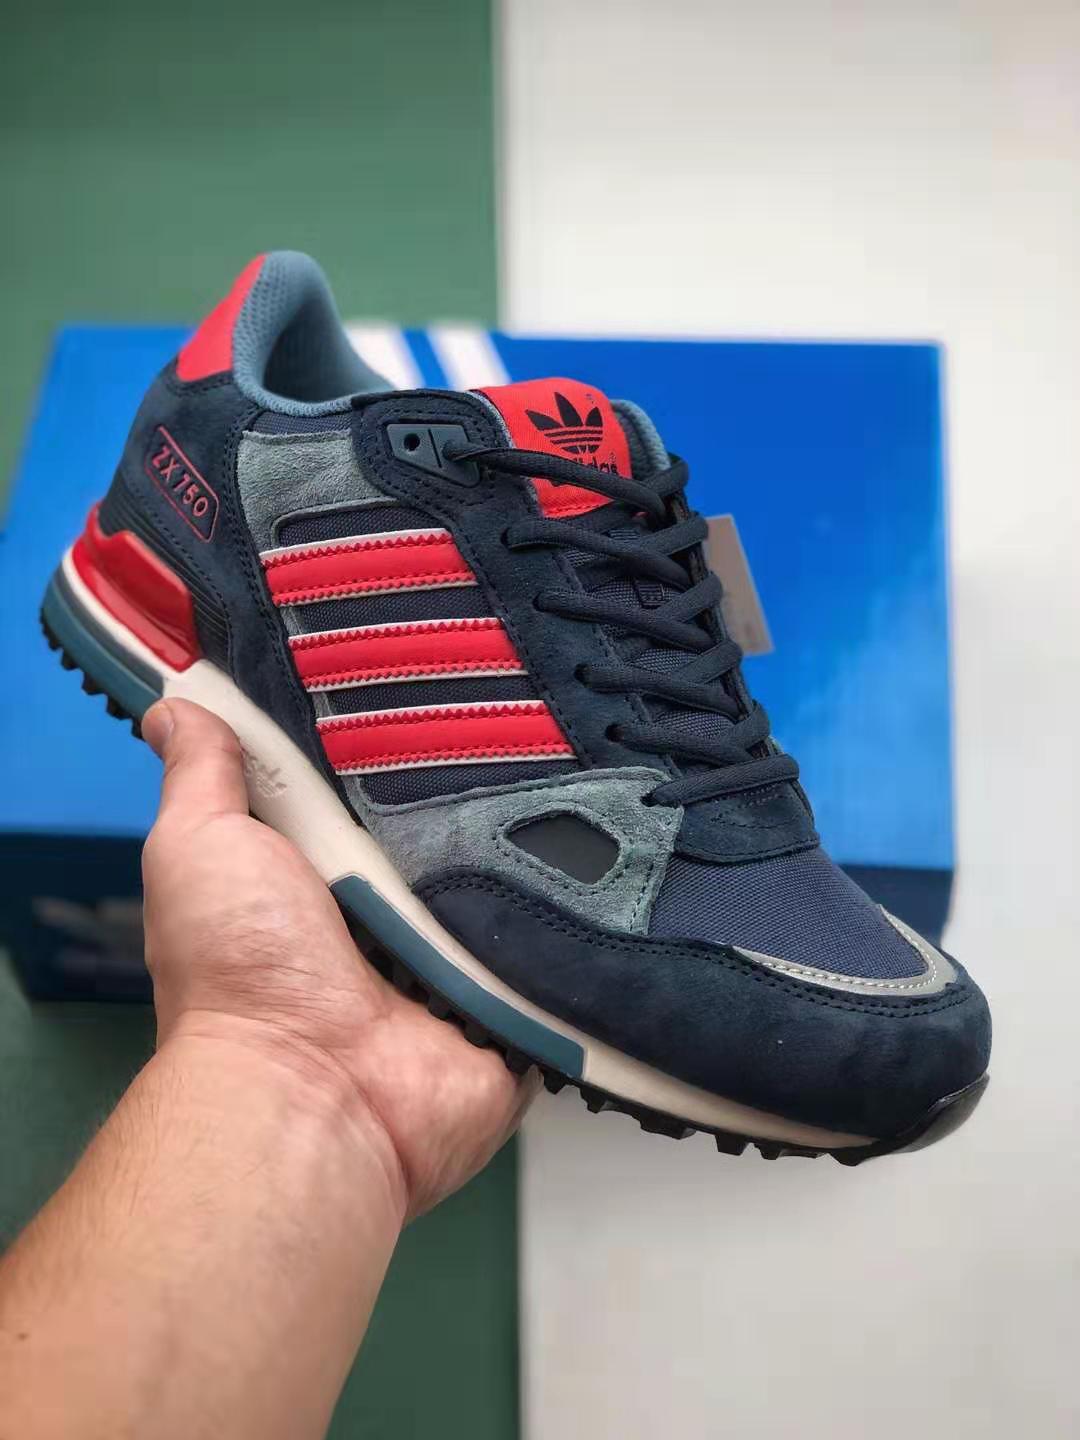 Adidas ZX 750 Navy Black Red M18260 - Shop Now for Classic Style